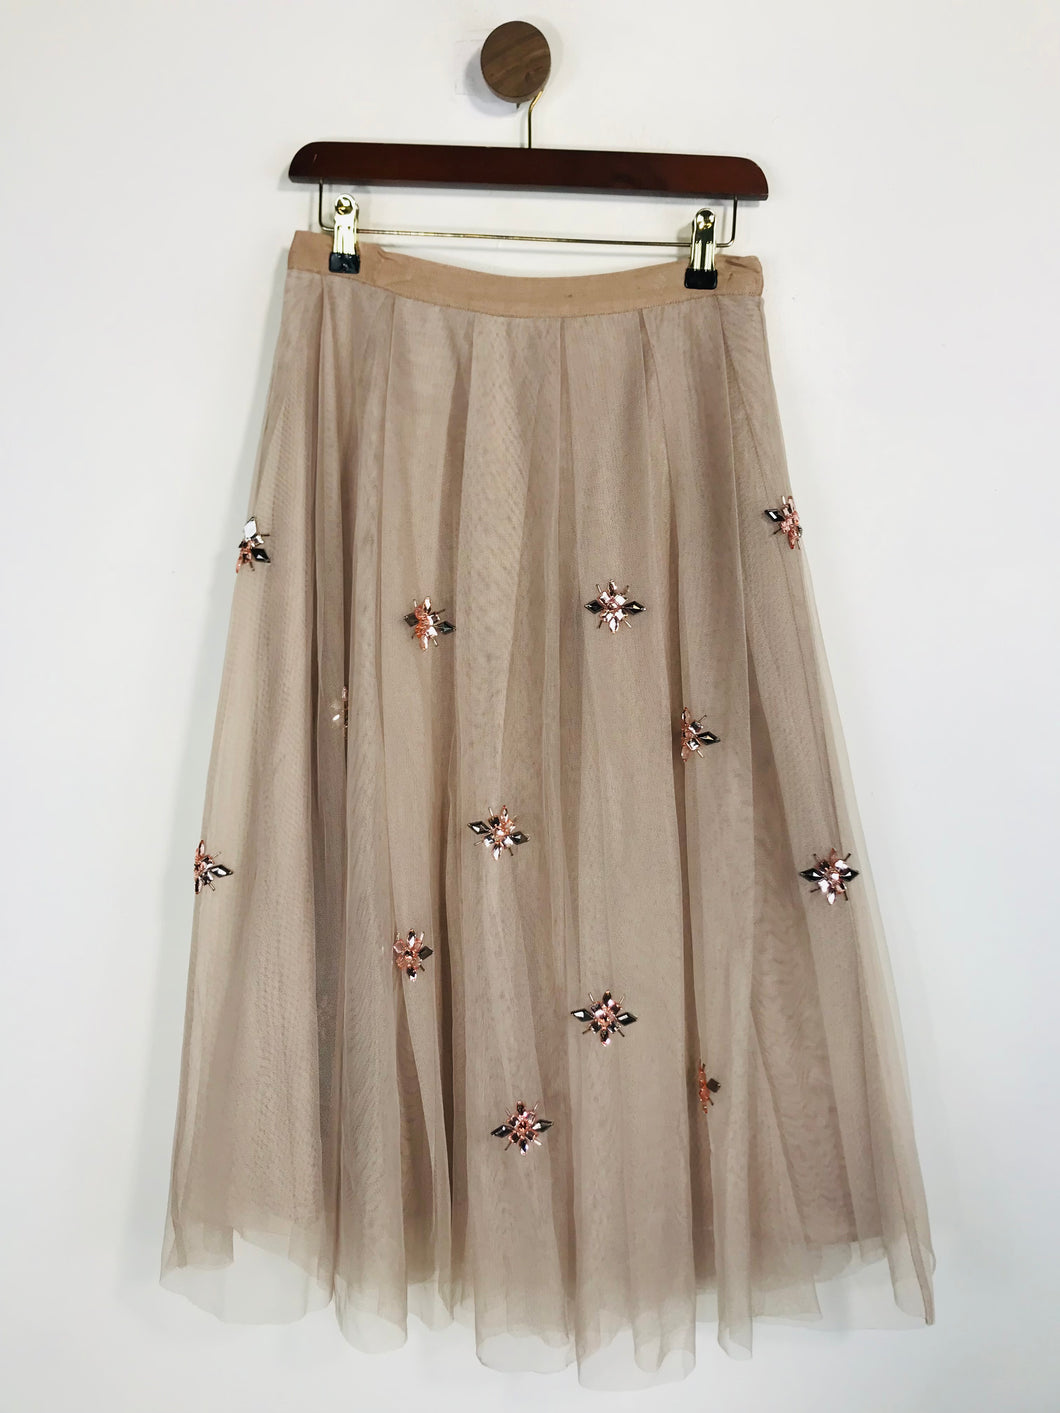 Darling Women's Embroidered Tulle A-Line Skirt | UK10 | Beige